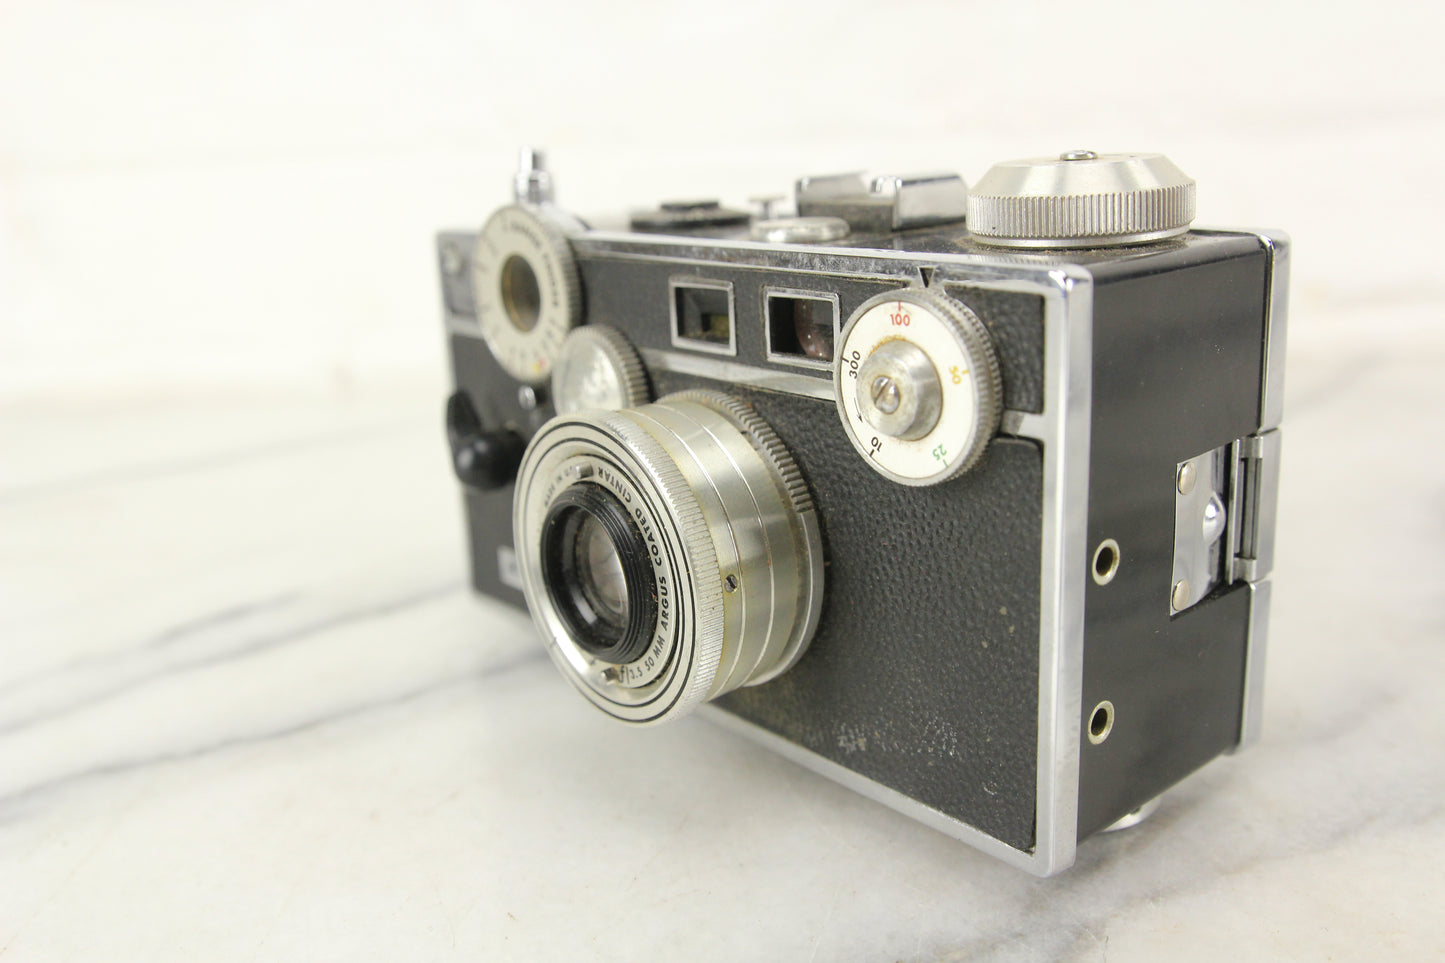 Argus 35mm Film Camera with 50mm Coated Cintar f/3.5 Lens